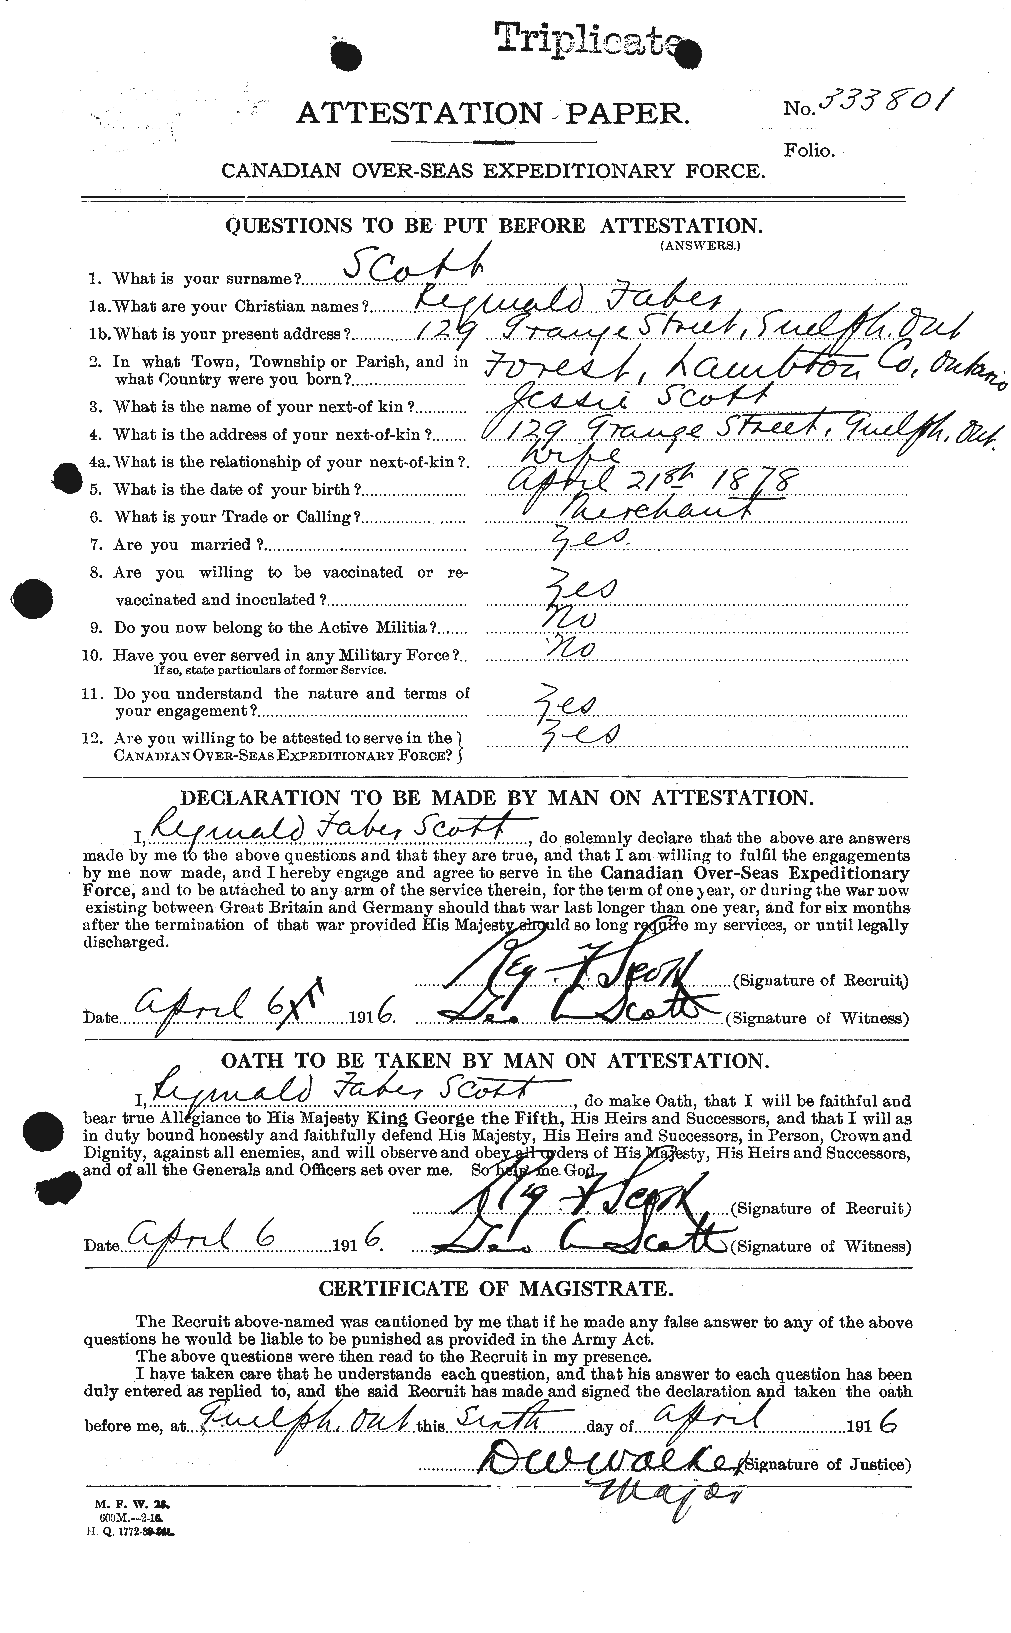 Personnel Records of the First World War - CEF 090197a